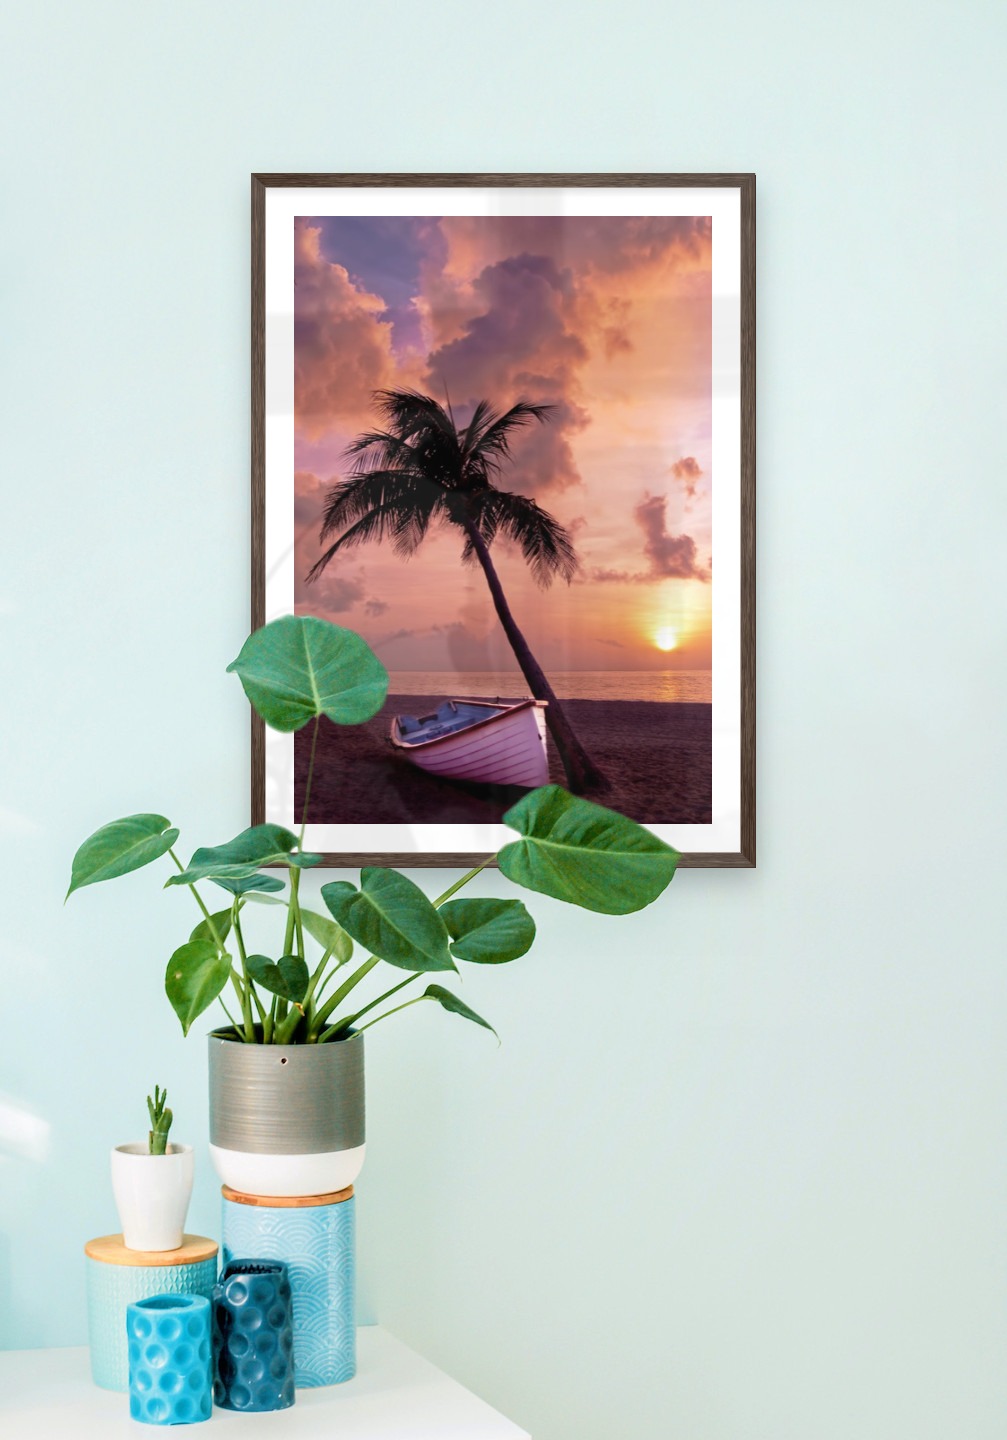 Gallery wall with picture frame in dark wood in size 50x70 with print "Palm on the beach"